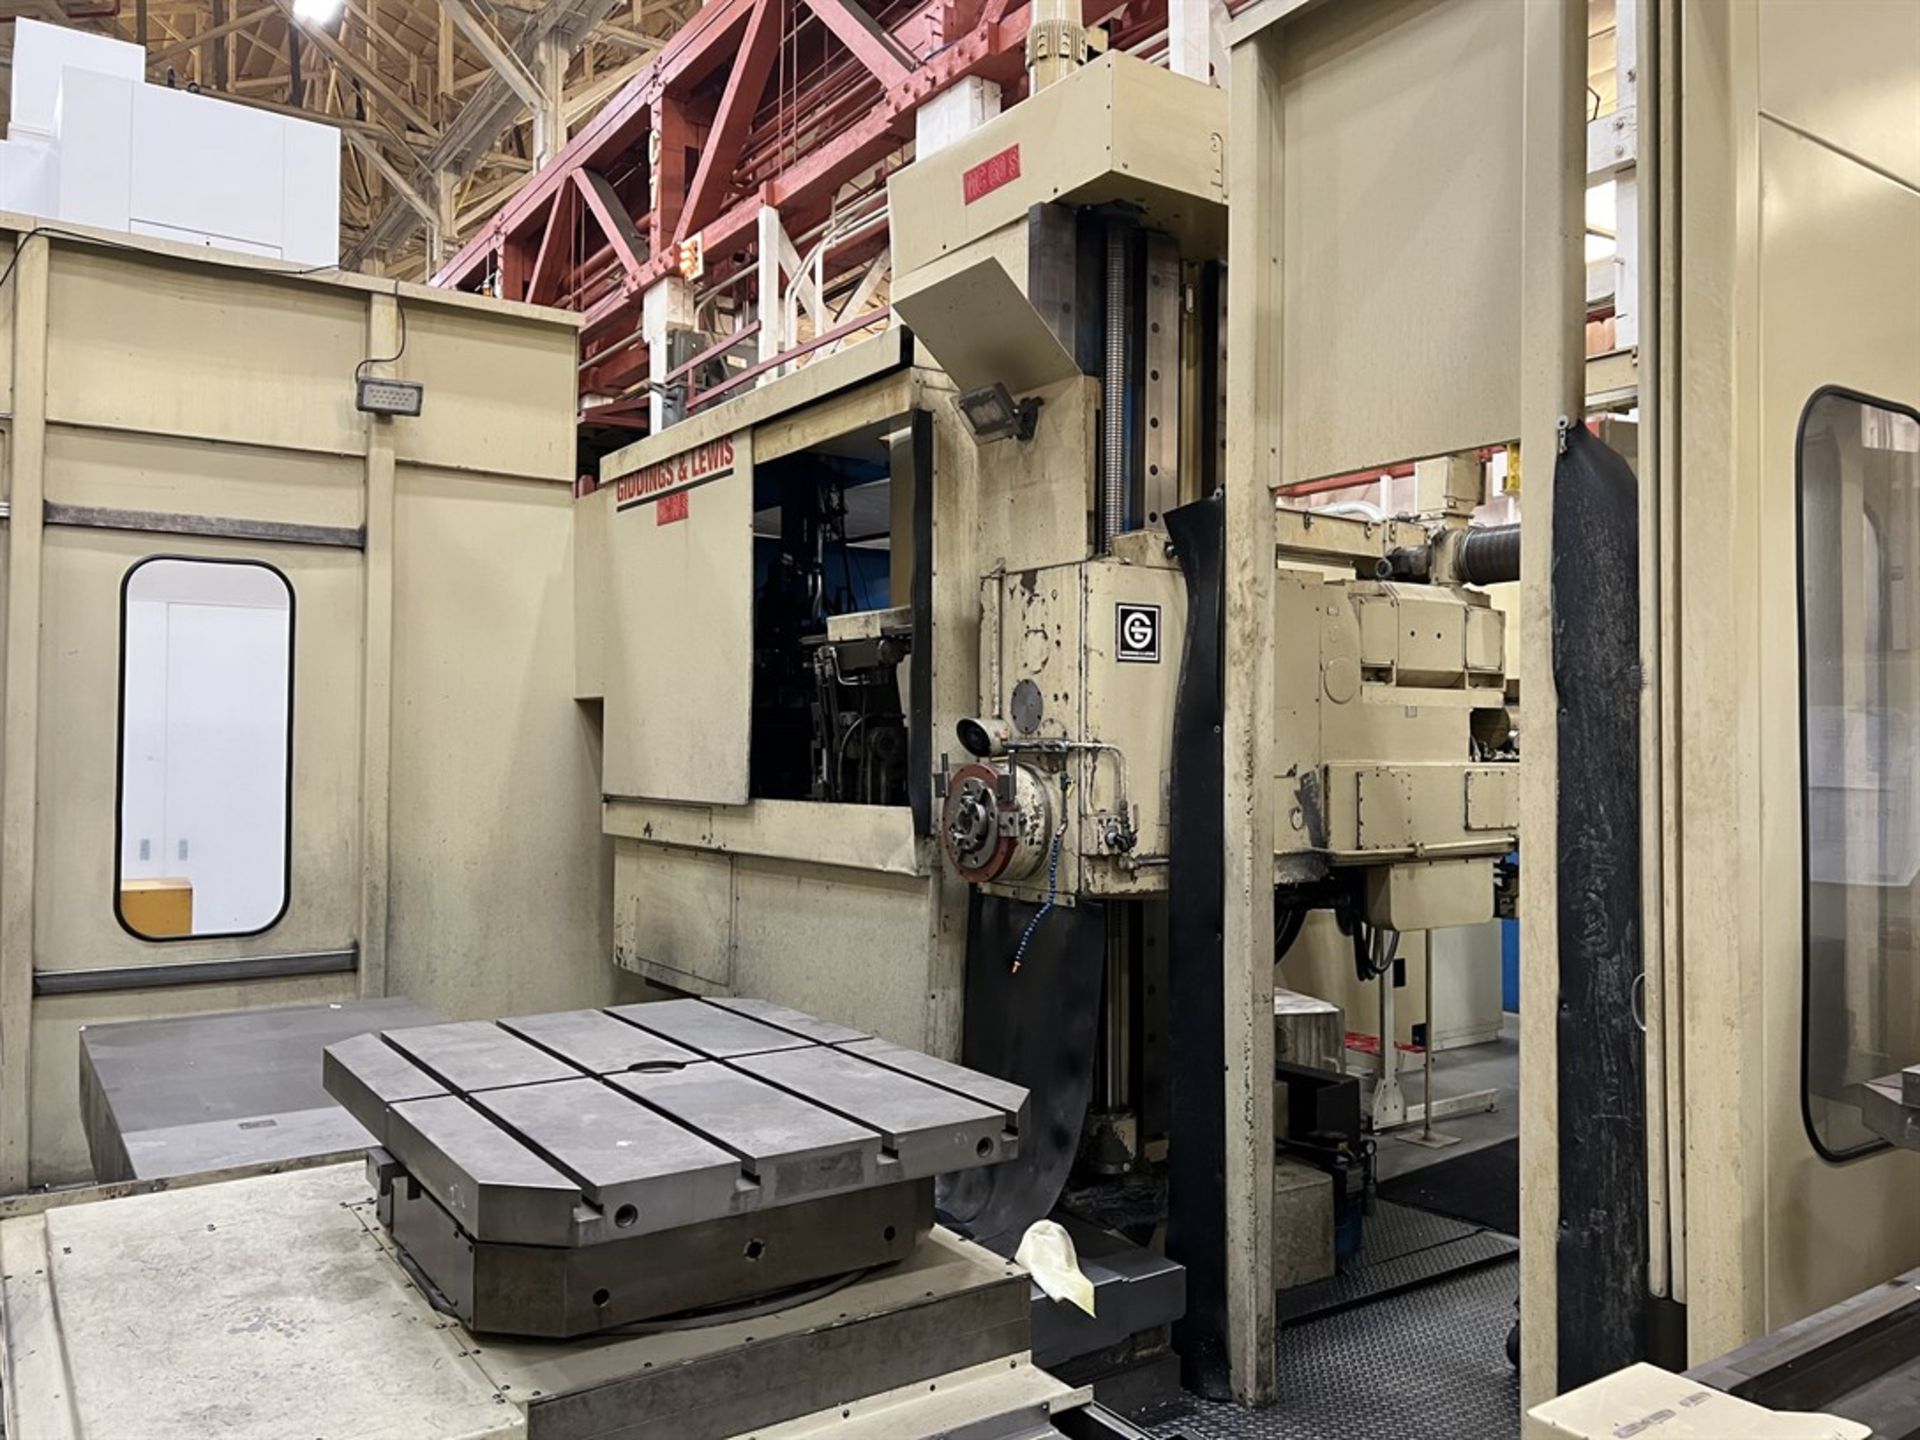 GIDDINGS & LEWIS MC-60 S Horizontal Machining Center, s/n 450-172-86, G & L 8000 Control, 6” Spindle - Image 2 of 12